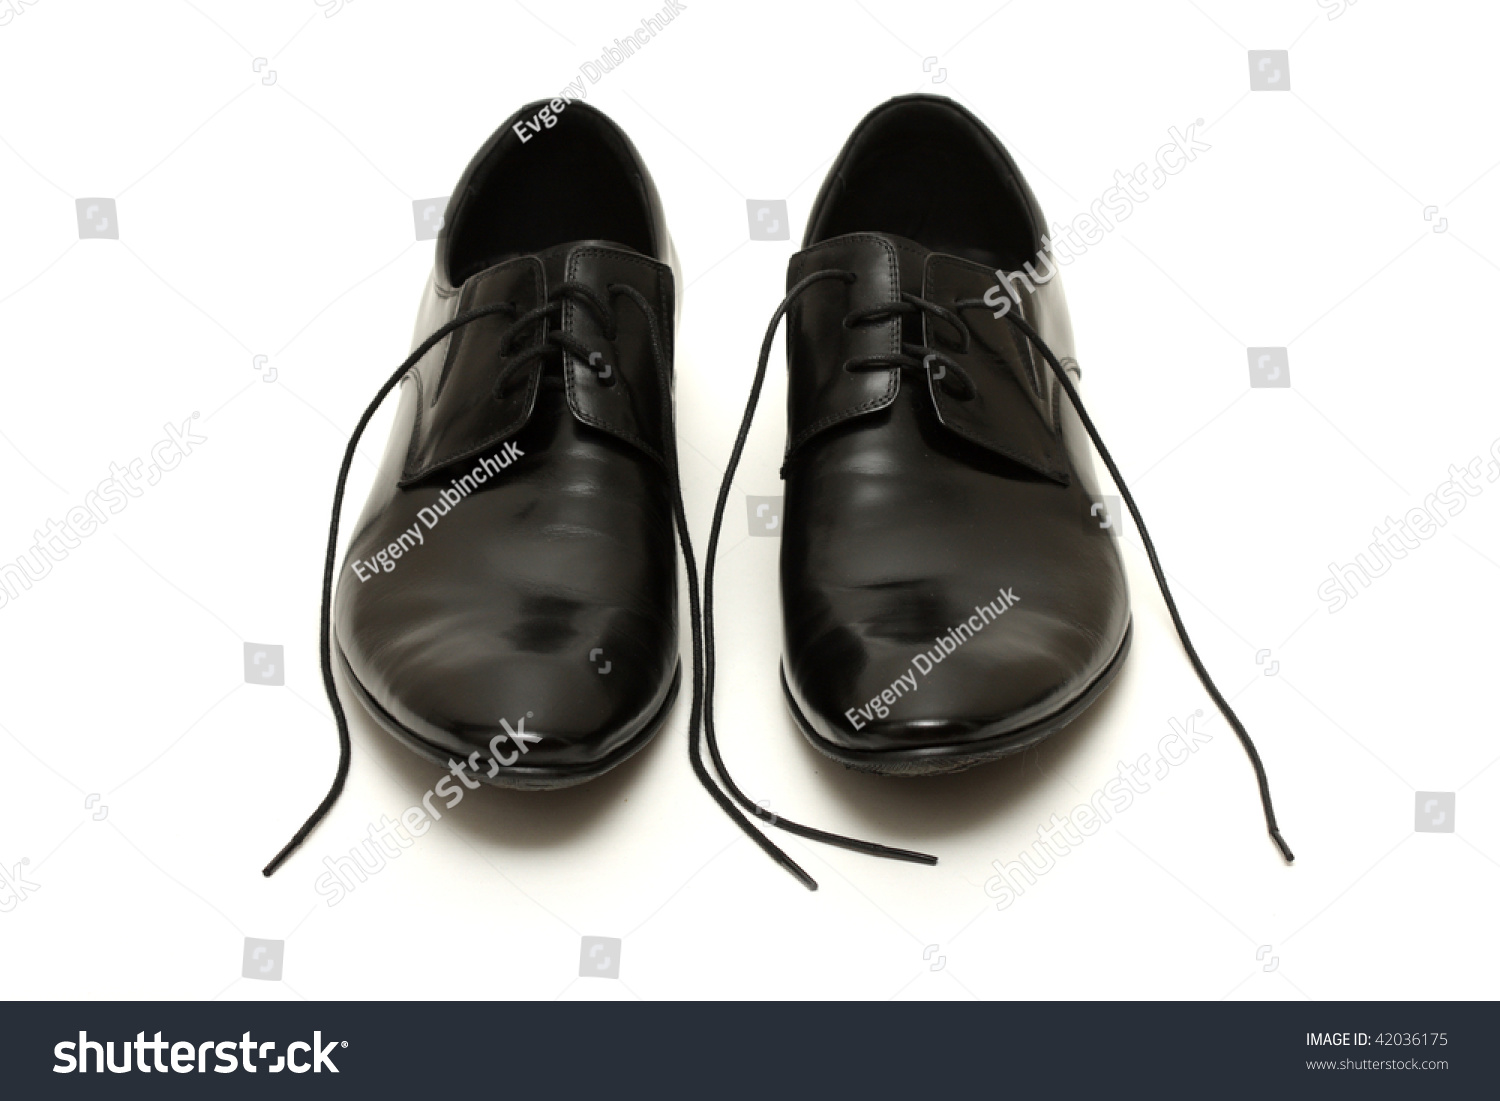 Classic Shiny Black Men'S Shoes With Untied Laces Stock Photo 42036175 ...